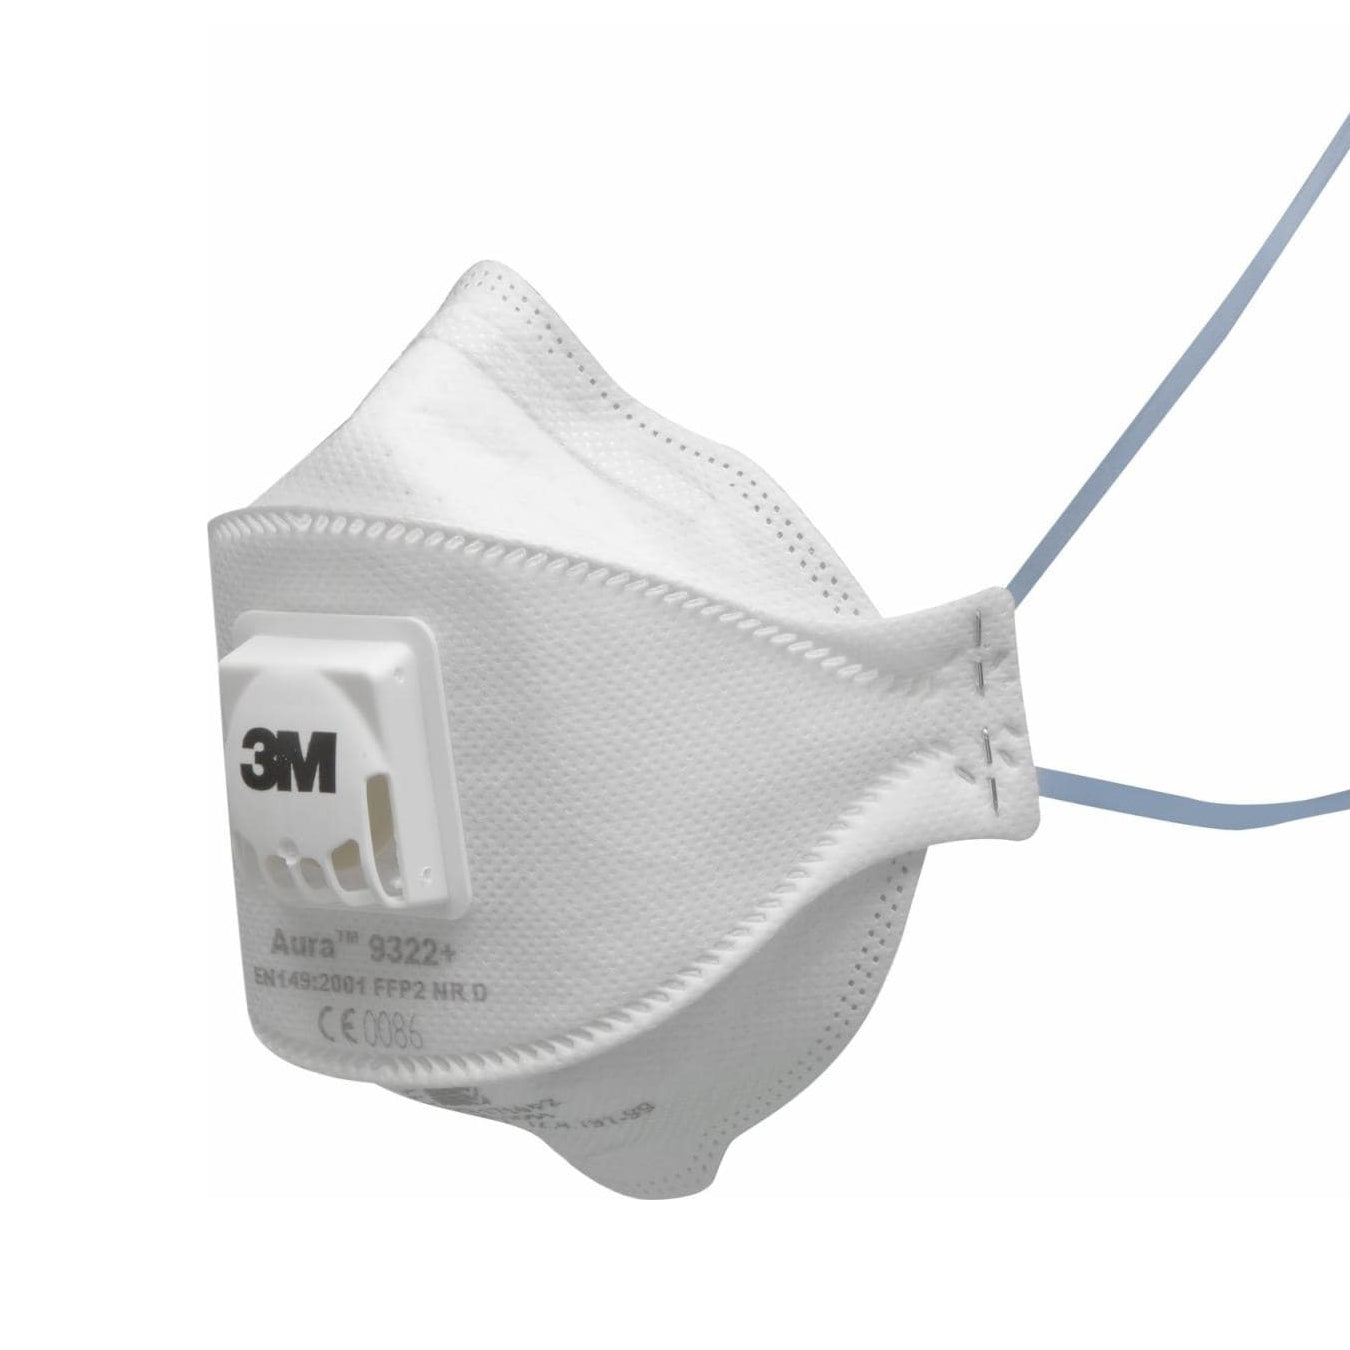 Respirator 3M™ Aura™ 9322+, (protection rating FFP2), with valve